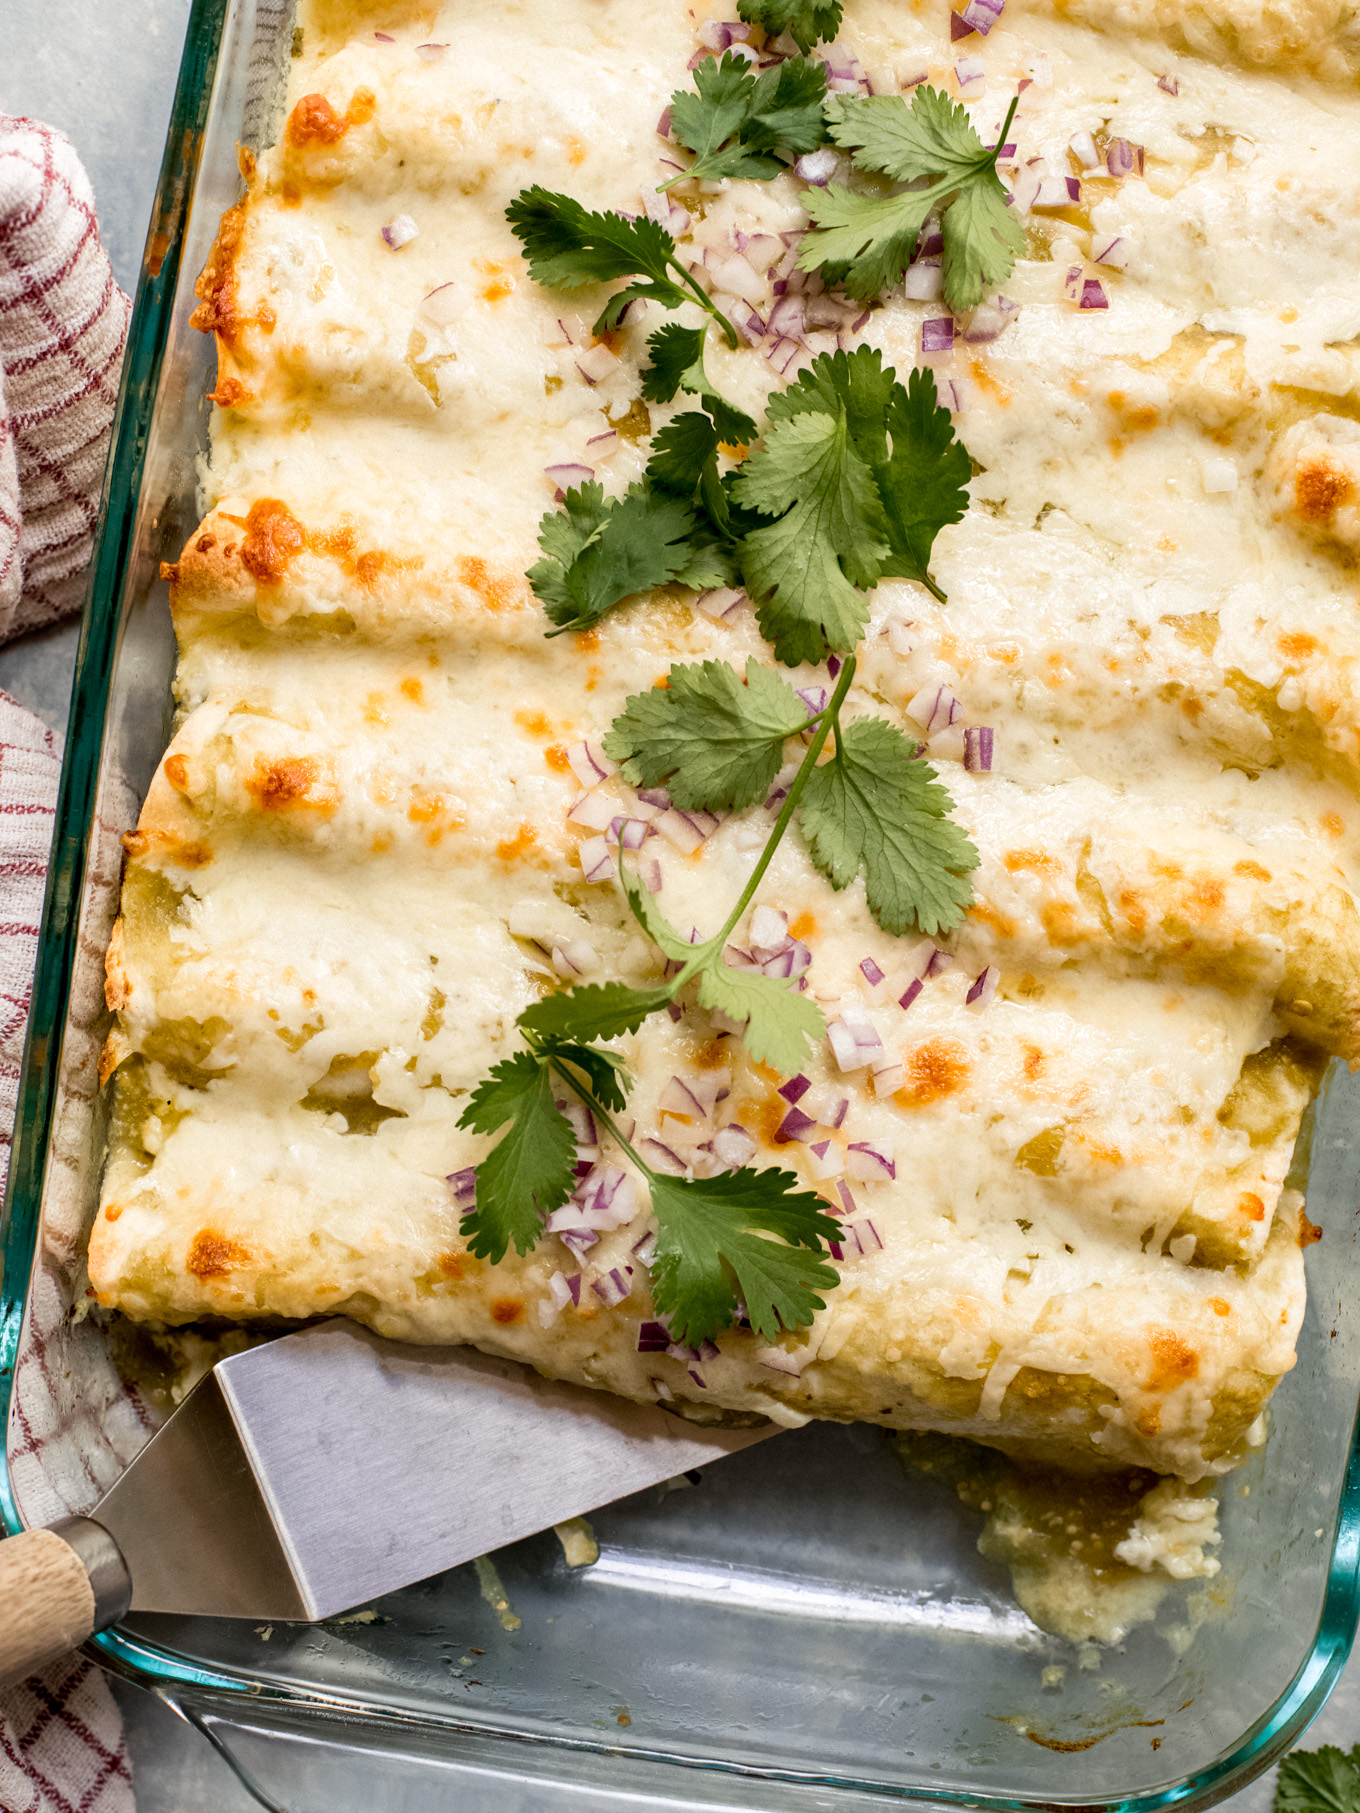 rolled up enchiladas verdes in glass baking dish with spatula on the side.